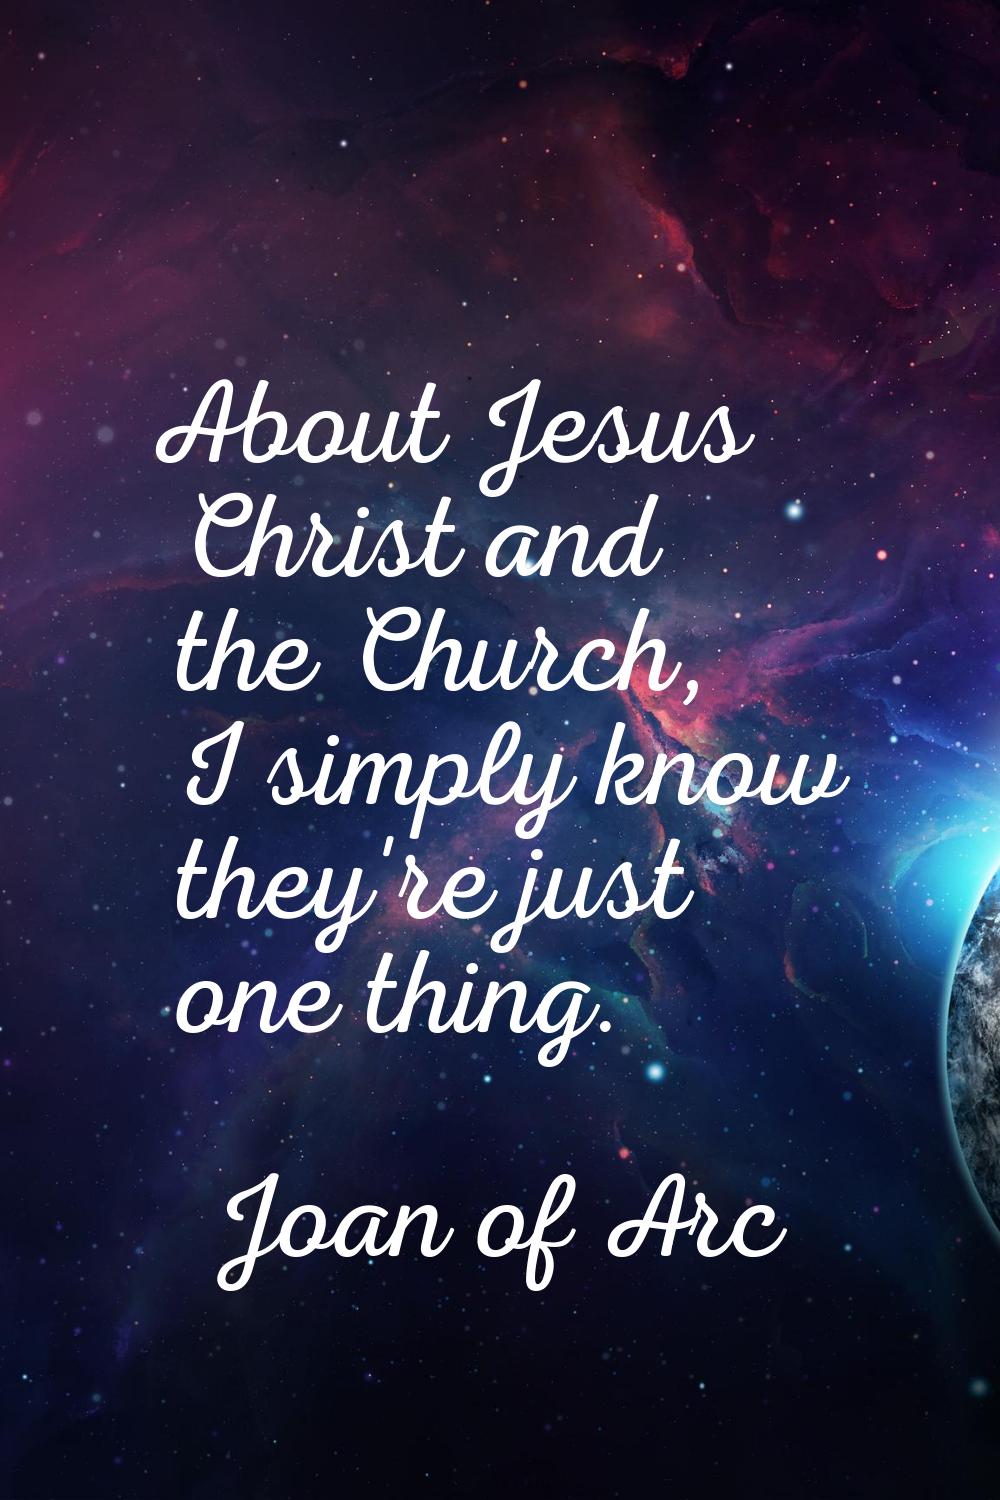 About Jesus Christ and the Church, I simply know they're just one thing.